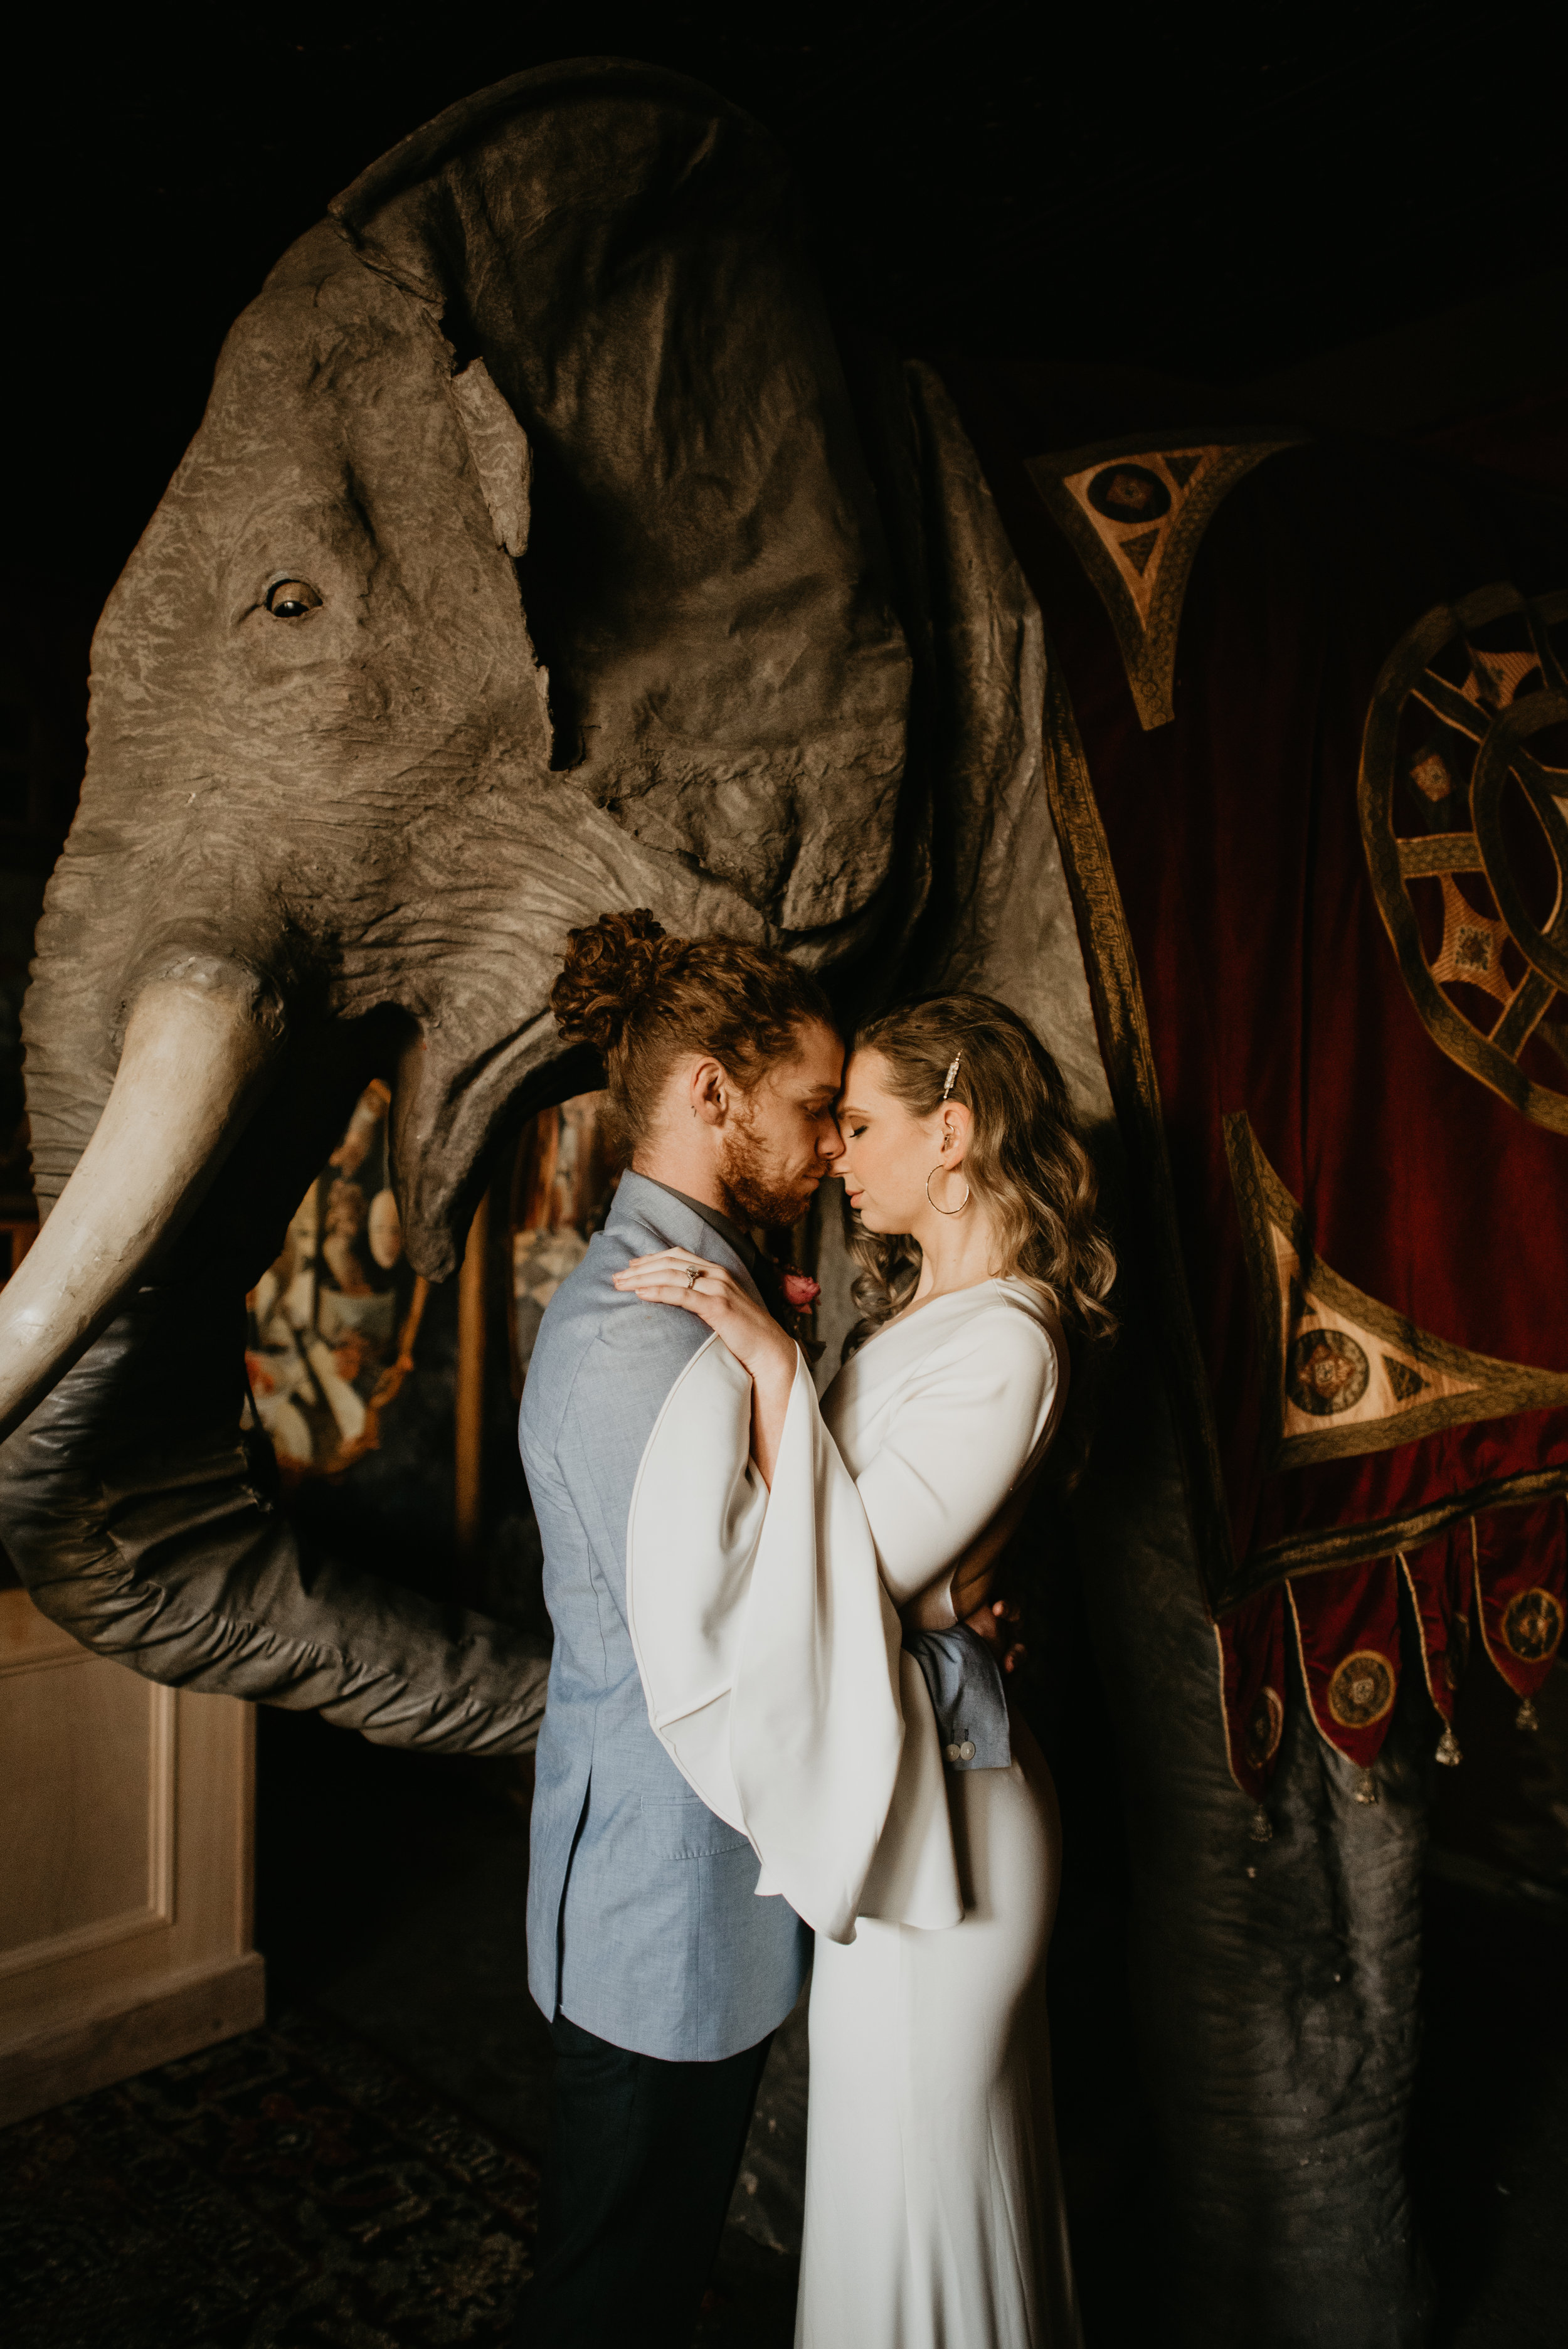 Beau + Britty - Dutch Carnival Styled Elopement Shoot at The Ruins, Seattle, WA - Seattle Elopement Photographer